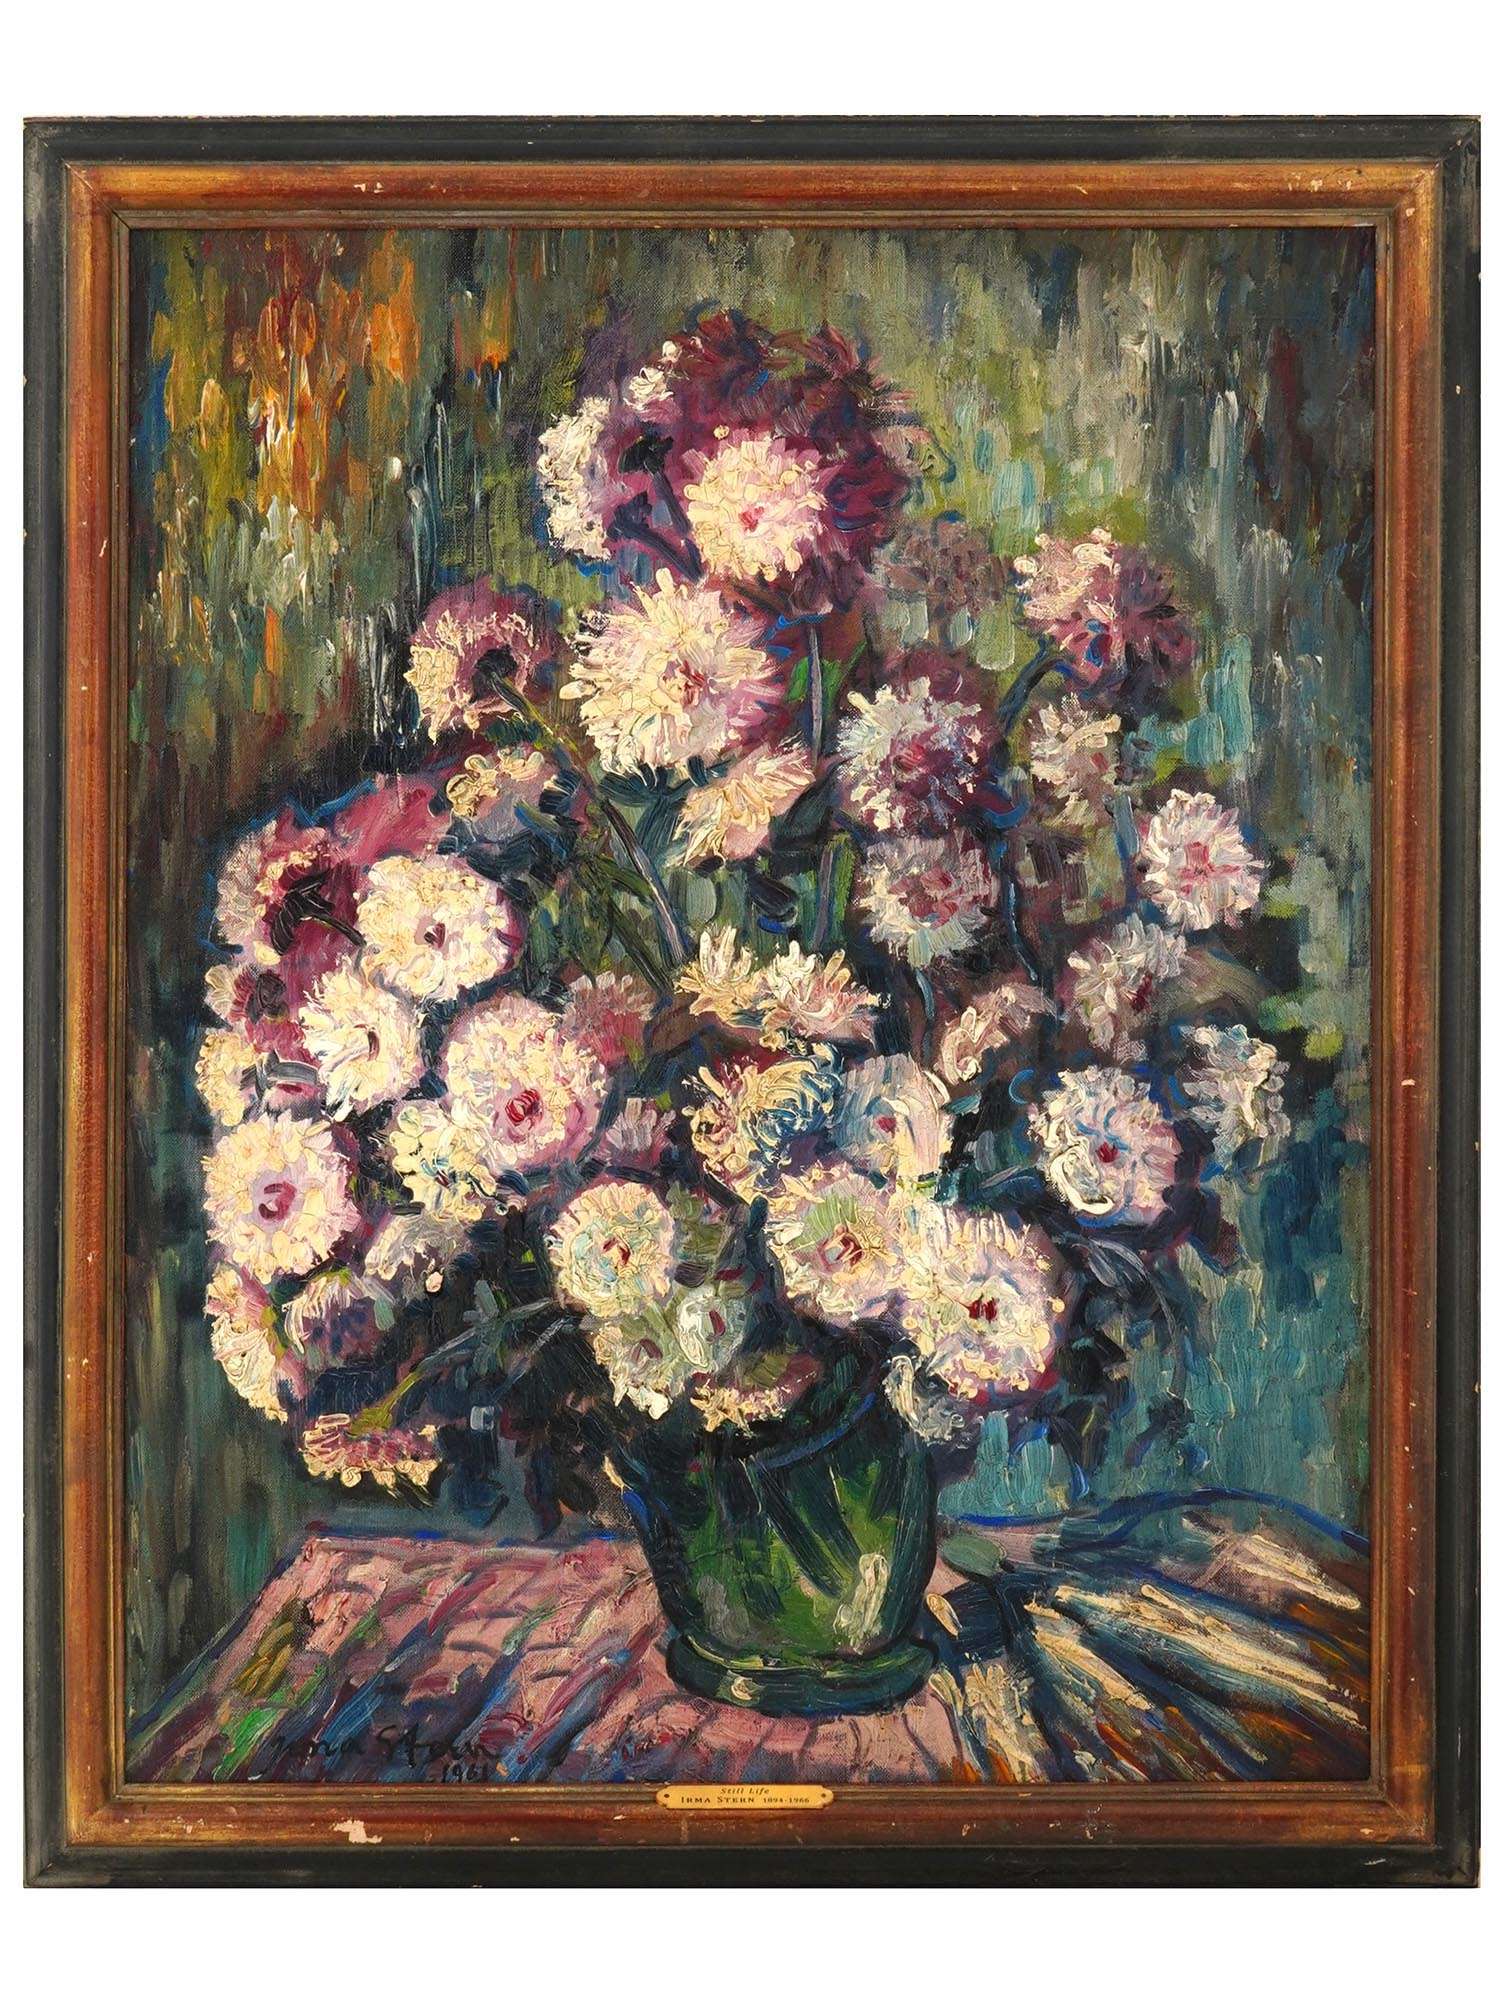 SOUTH AFRICAN STILL LIFE PAINTING BY IRMA STERN FRAMED PIC-0